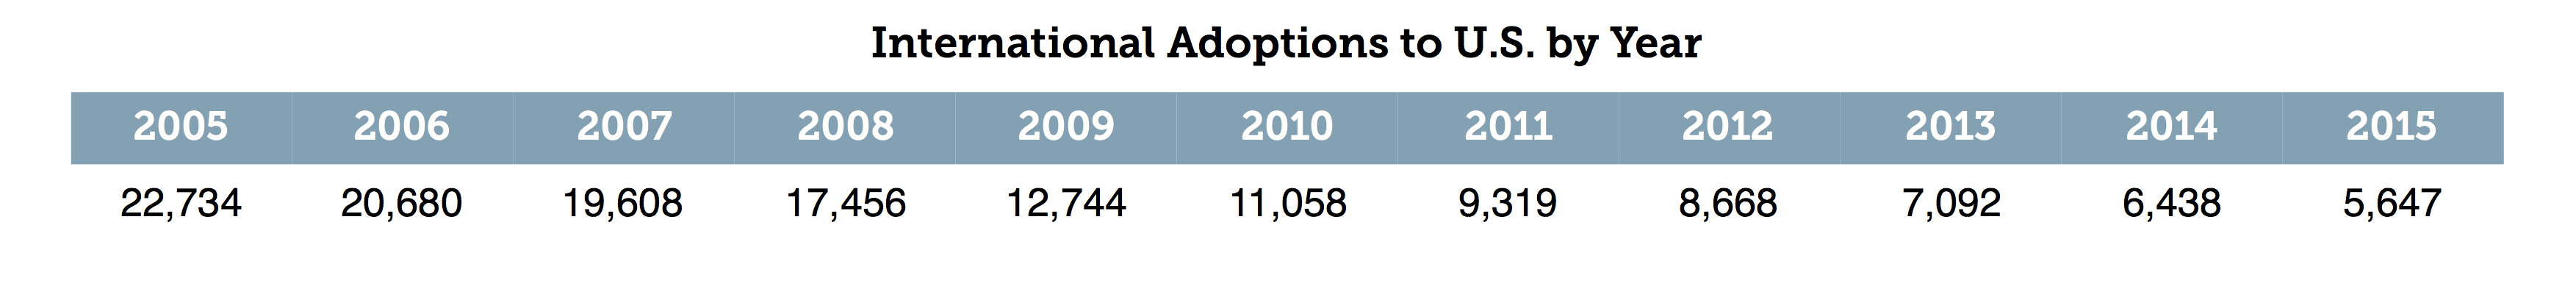 adoptions to us by year key